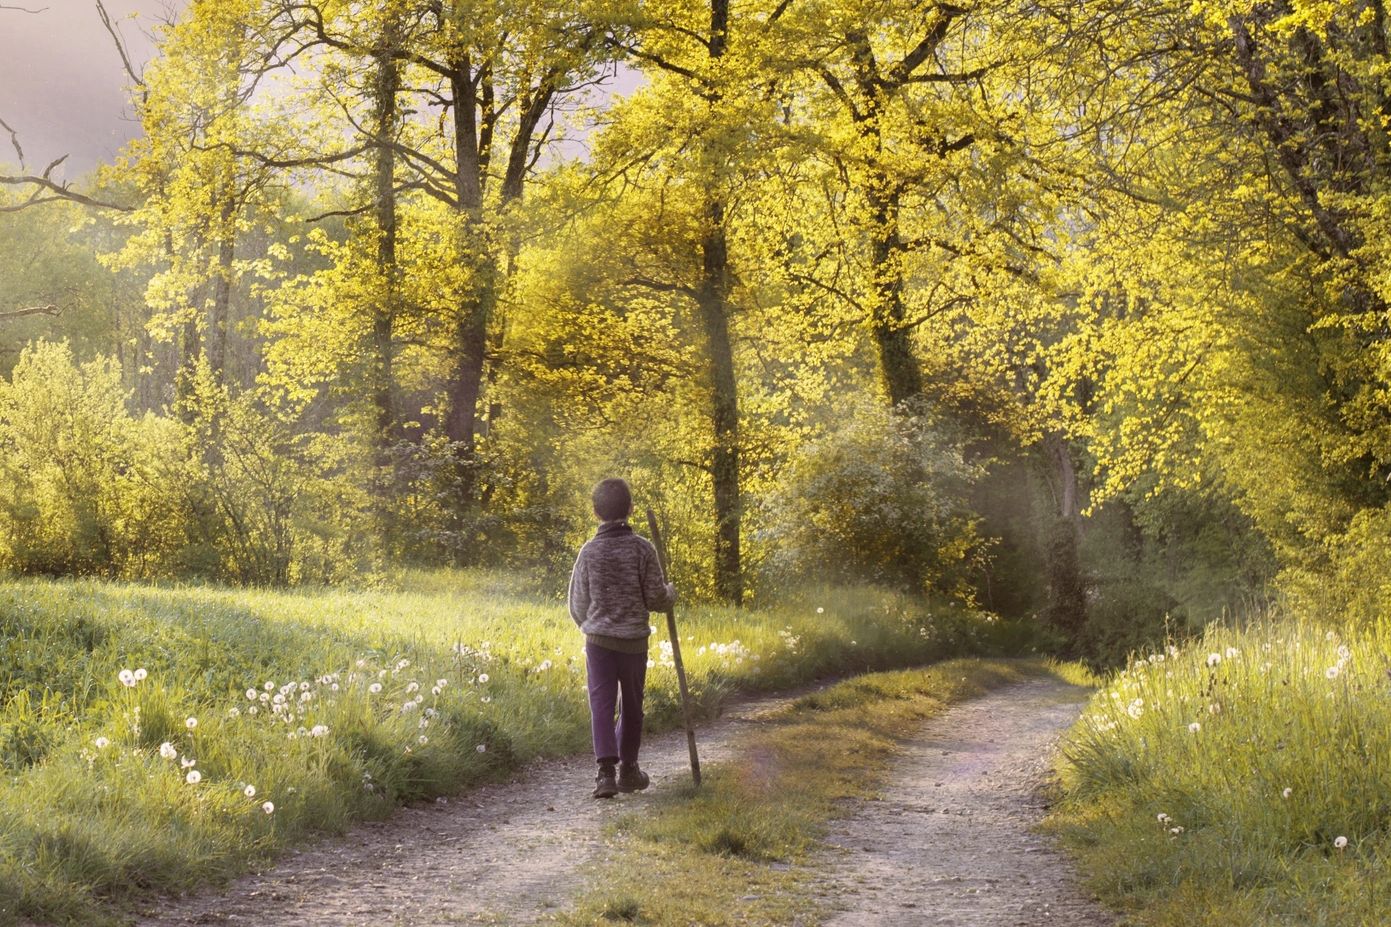 Painting of a person on a walking trail in a beautiful forest